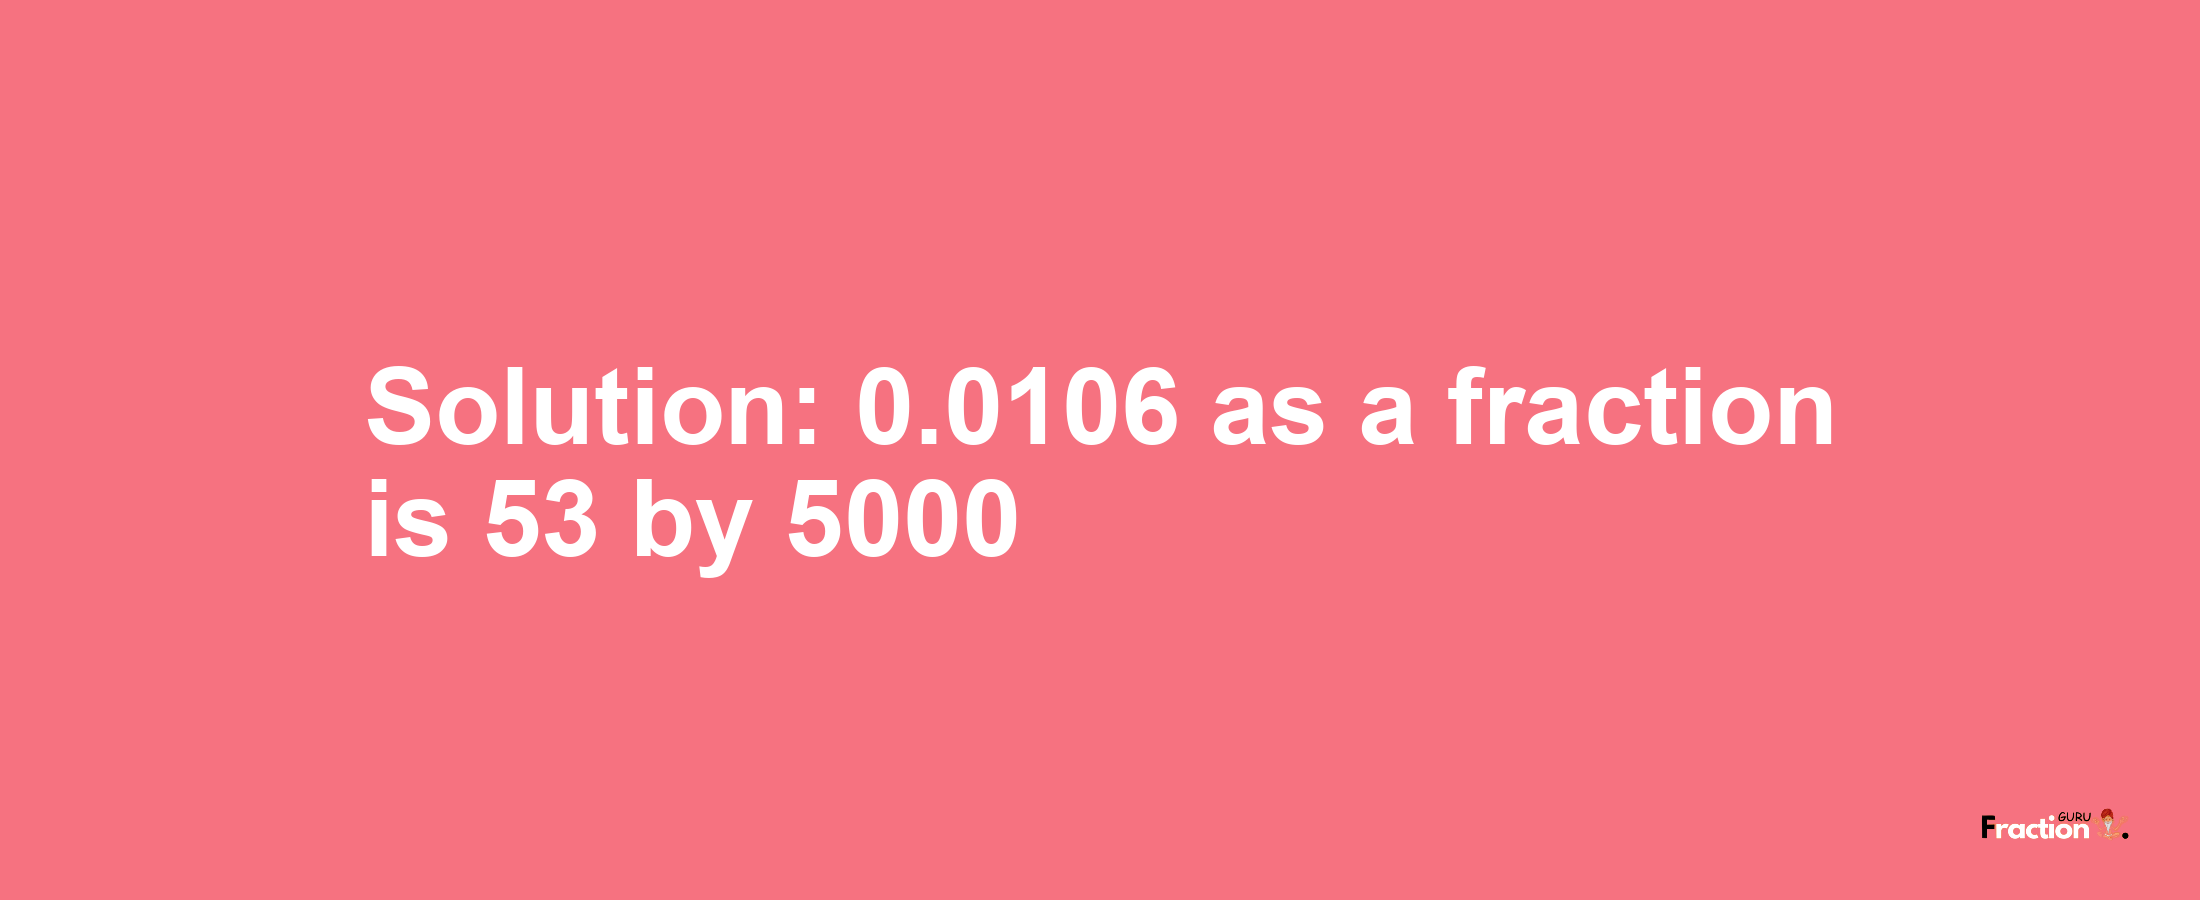 Solution:0.0106 as a fraction is 53/5000